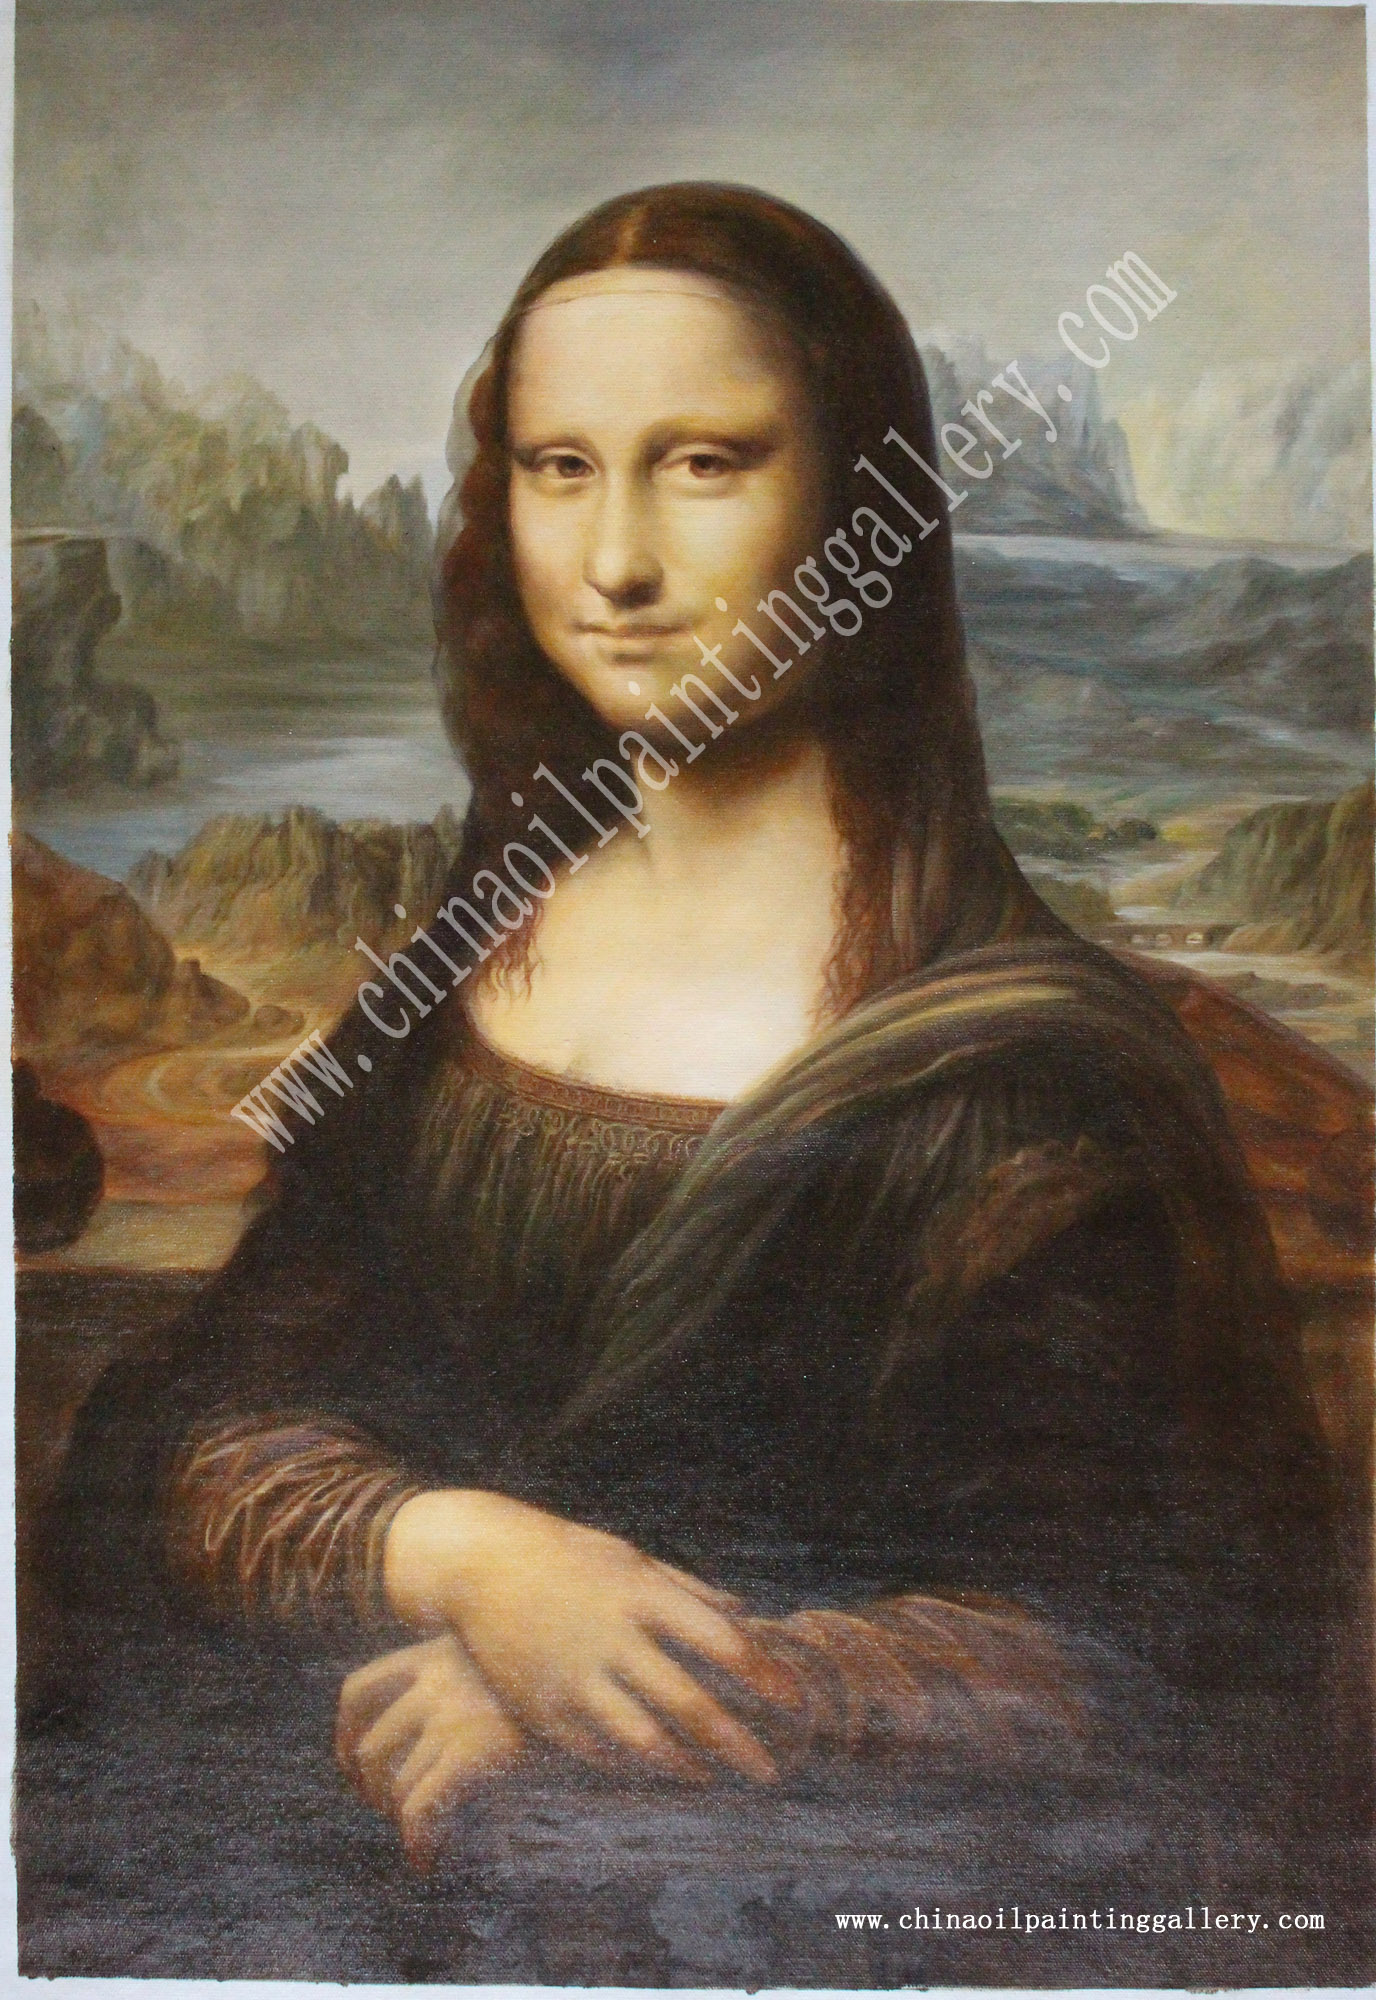 Mona Lisa Oil painting reproduction 8